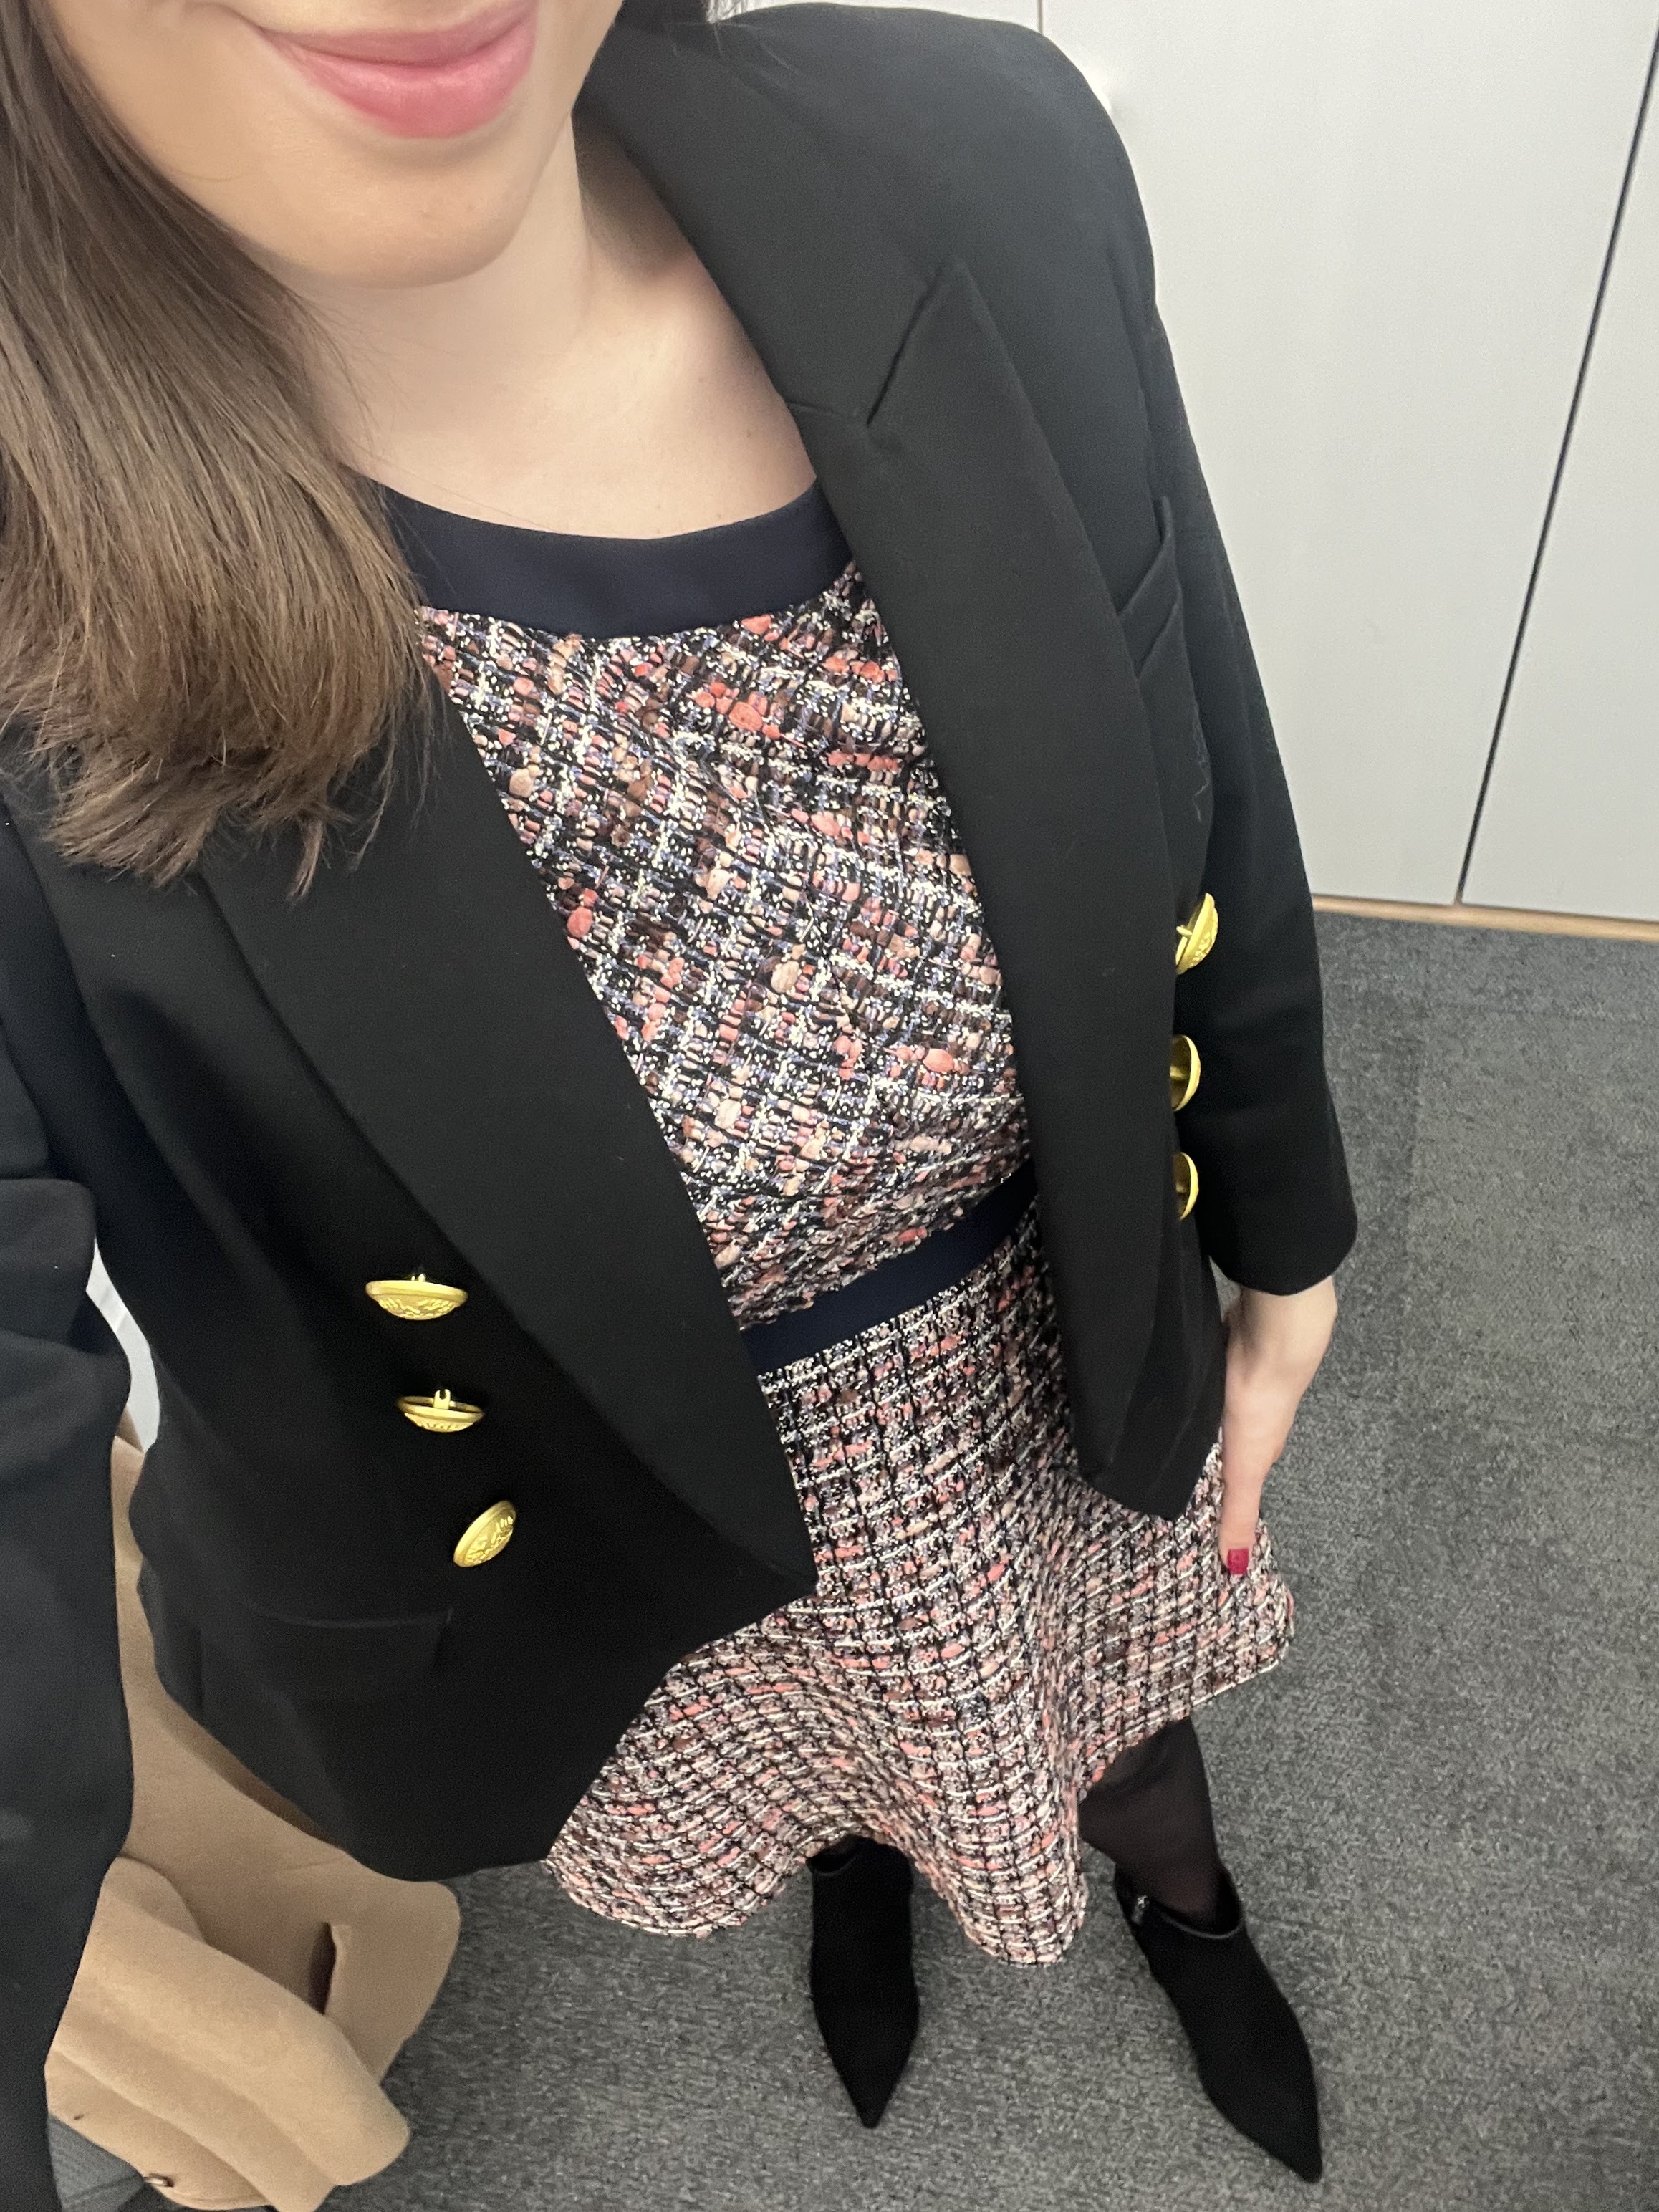 office style, workwear, office outfit, winter workwear, black blazer, tweed dress, gal meets glam, office style, law firm, suiting, professional clothes